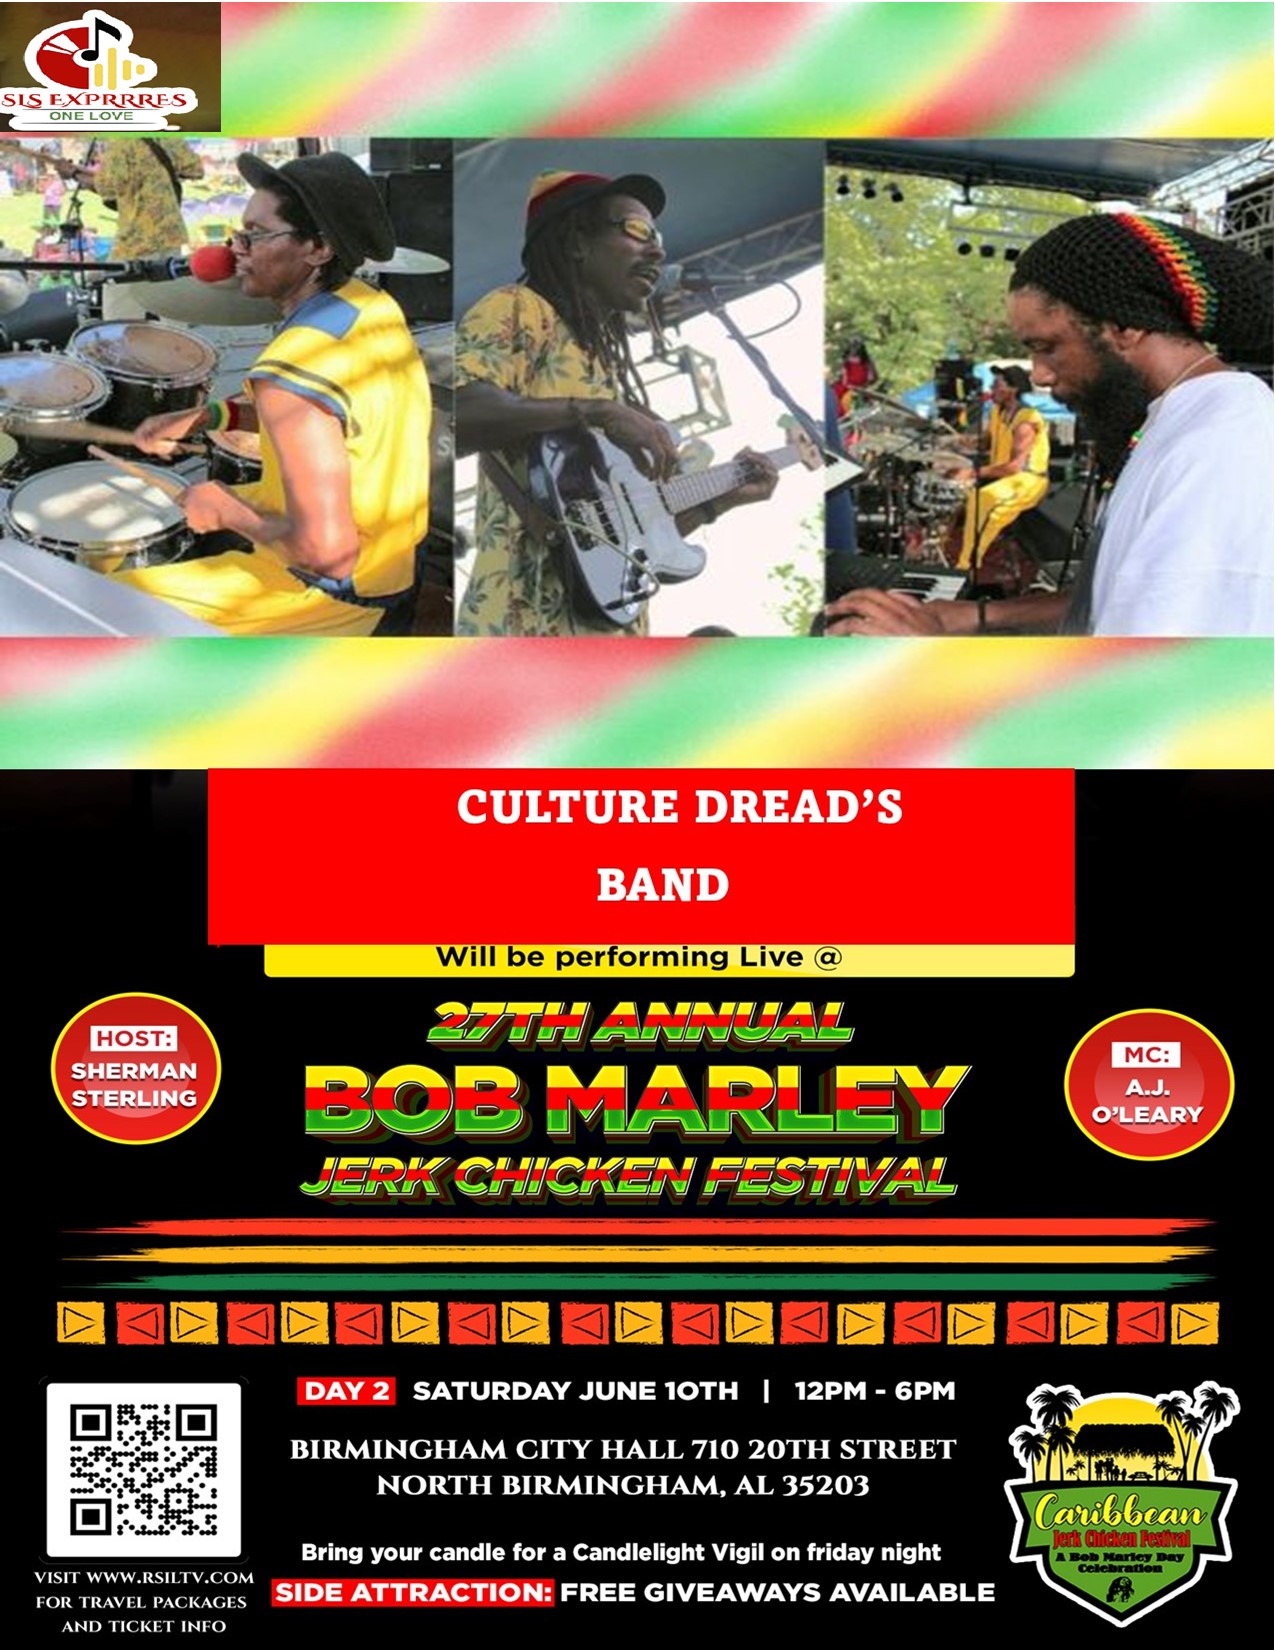 SLS Exprrres and La Cabana LLC, Presents The 27th Annual Bob Marley Day celebration A Taste of the Caribbean Jerk Festival and Reggae and Latino Music Series. A Two Day Event Friday June 9, 2023, and Saturday June 10, 2023